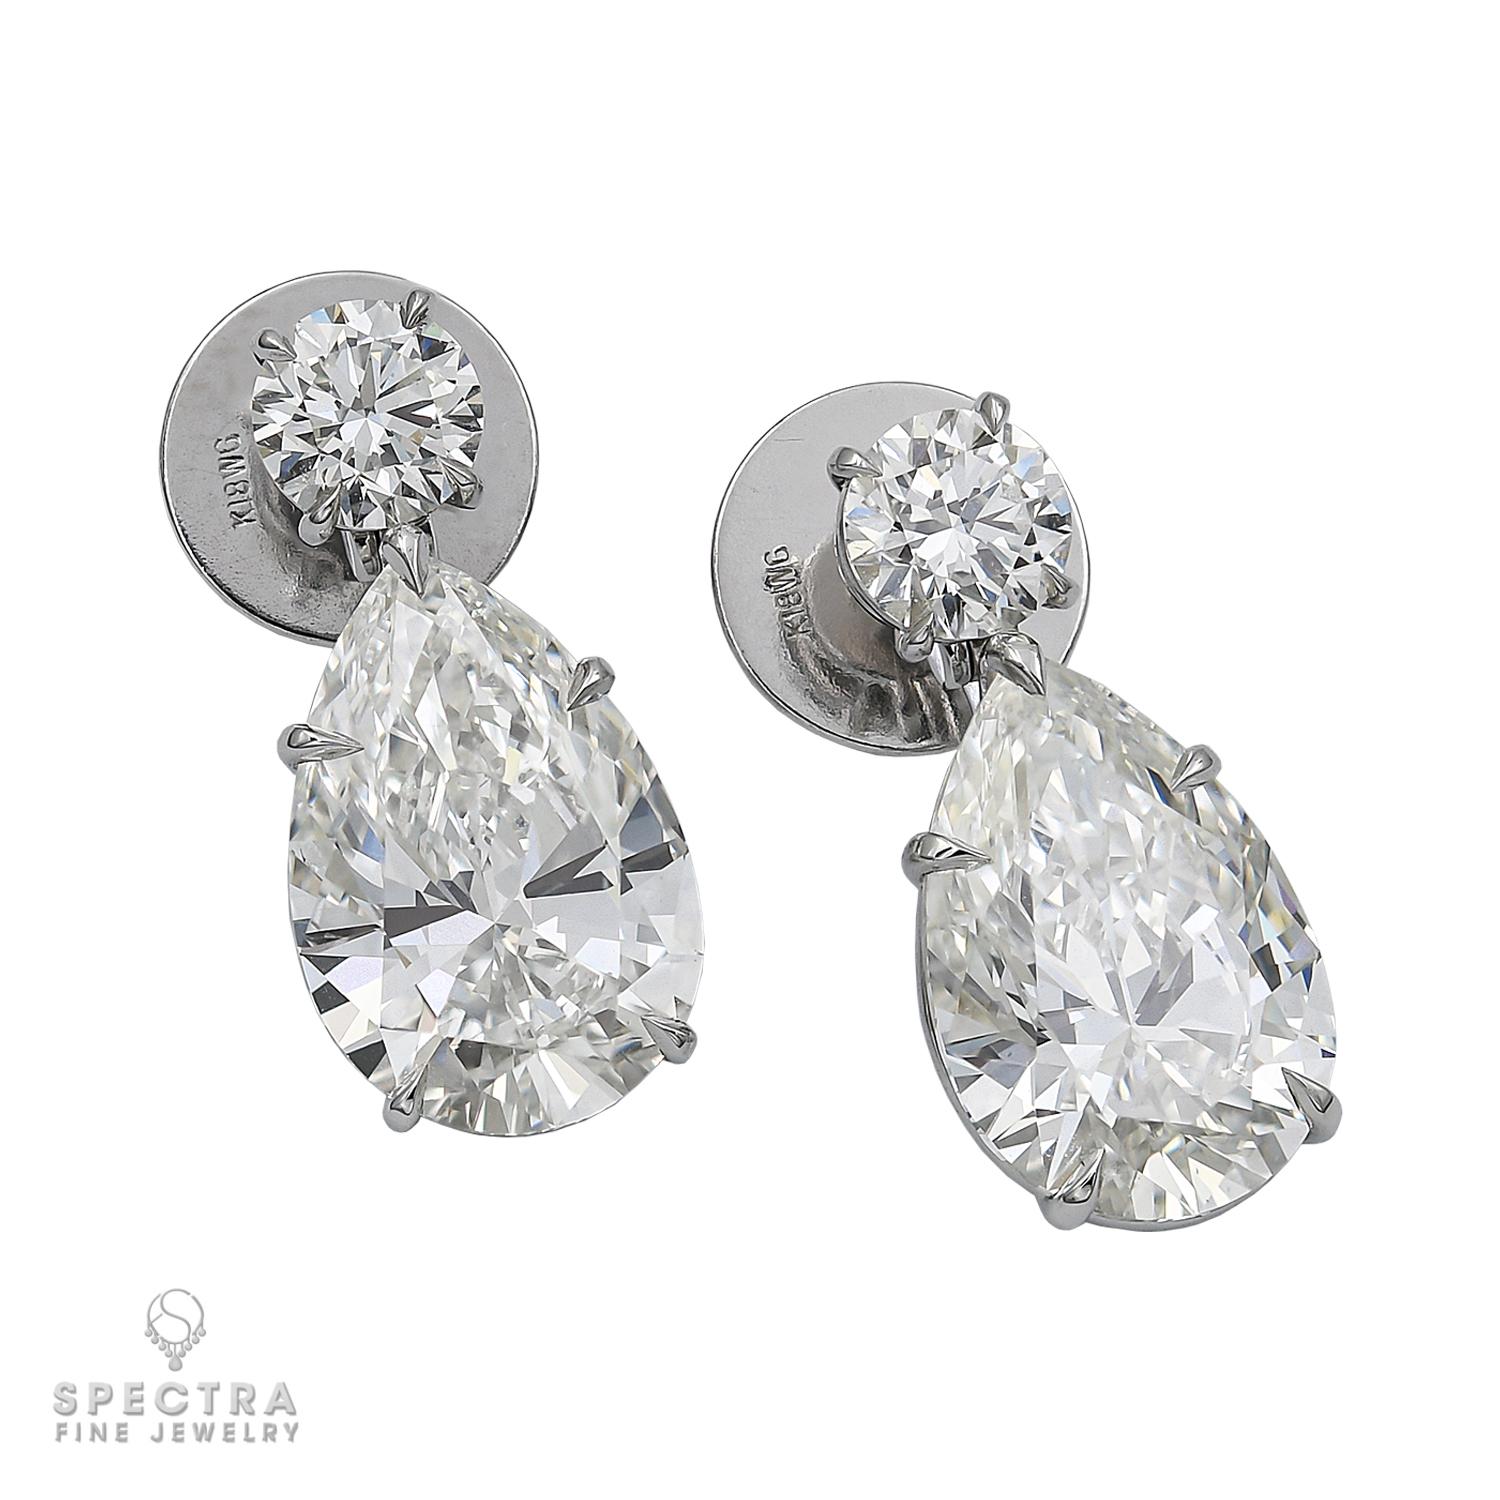 These exquisite earrings feature a pair of pear-shaped diamonds, renowned for their graceful and tapered silhouette, making them the perfect choice for stunning drop earrings that capture attention with every graceful sway. The enchanting